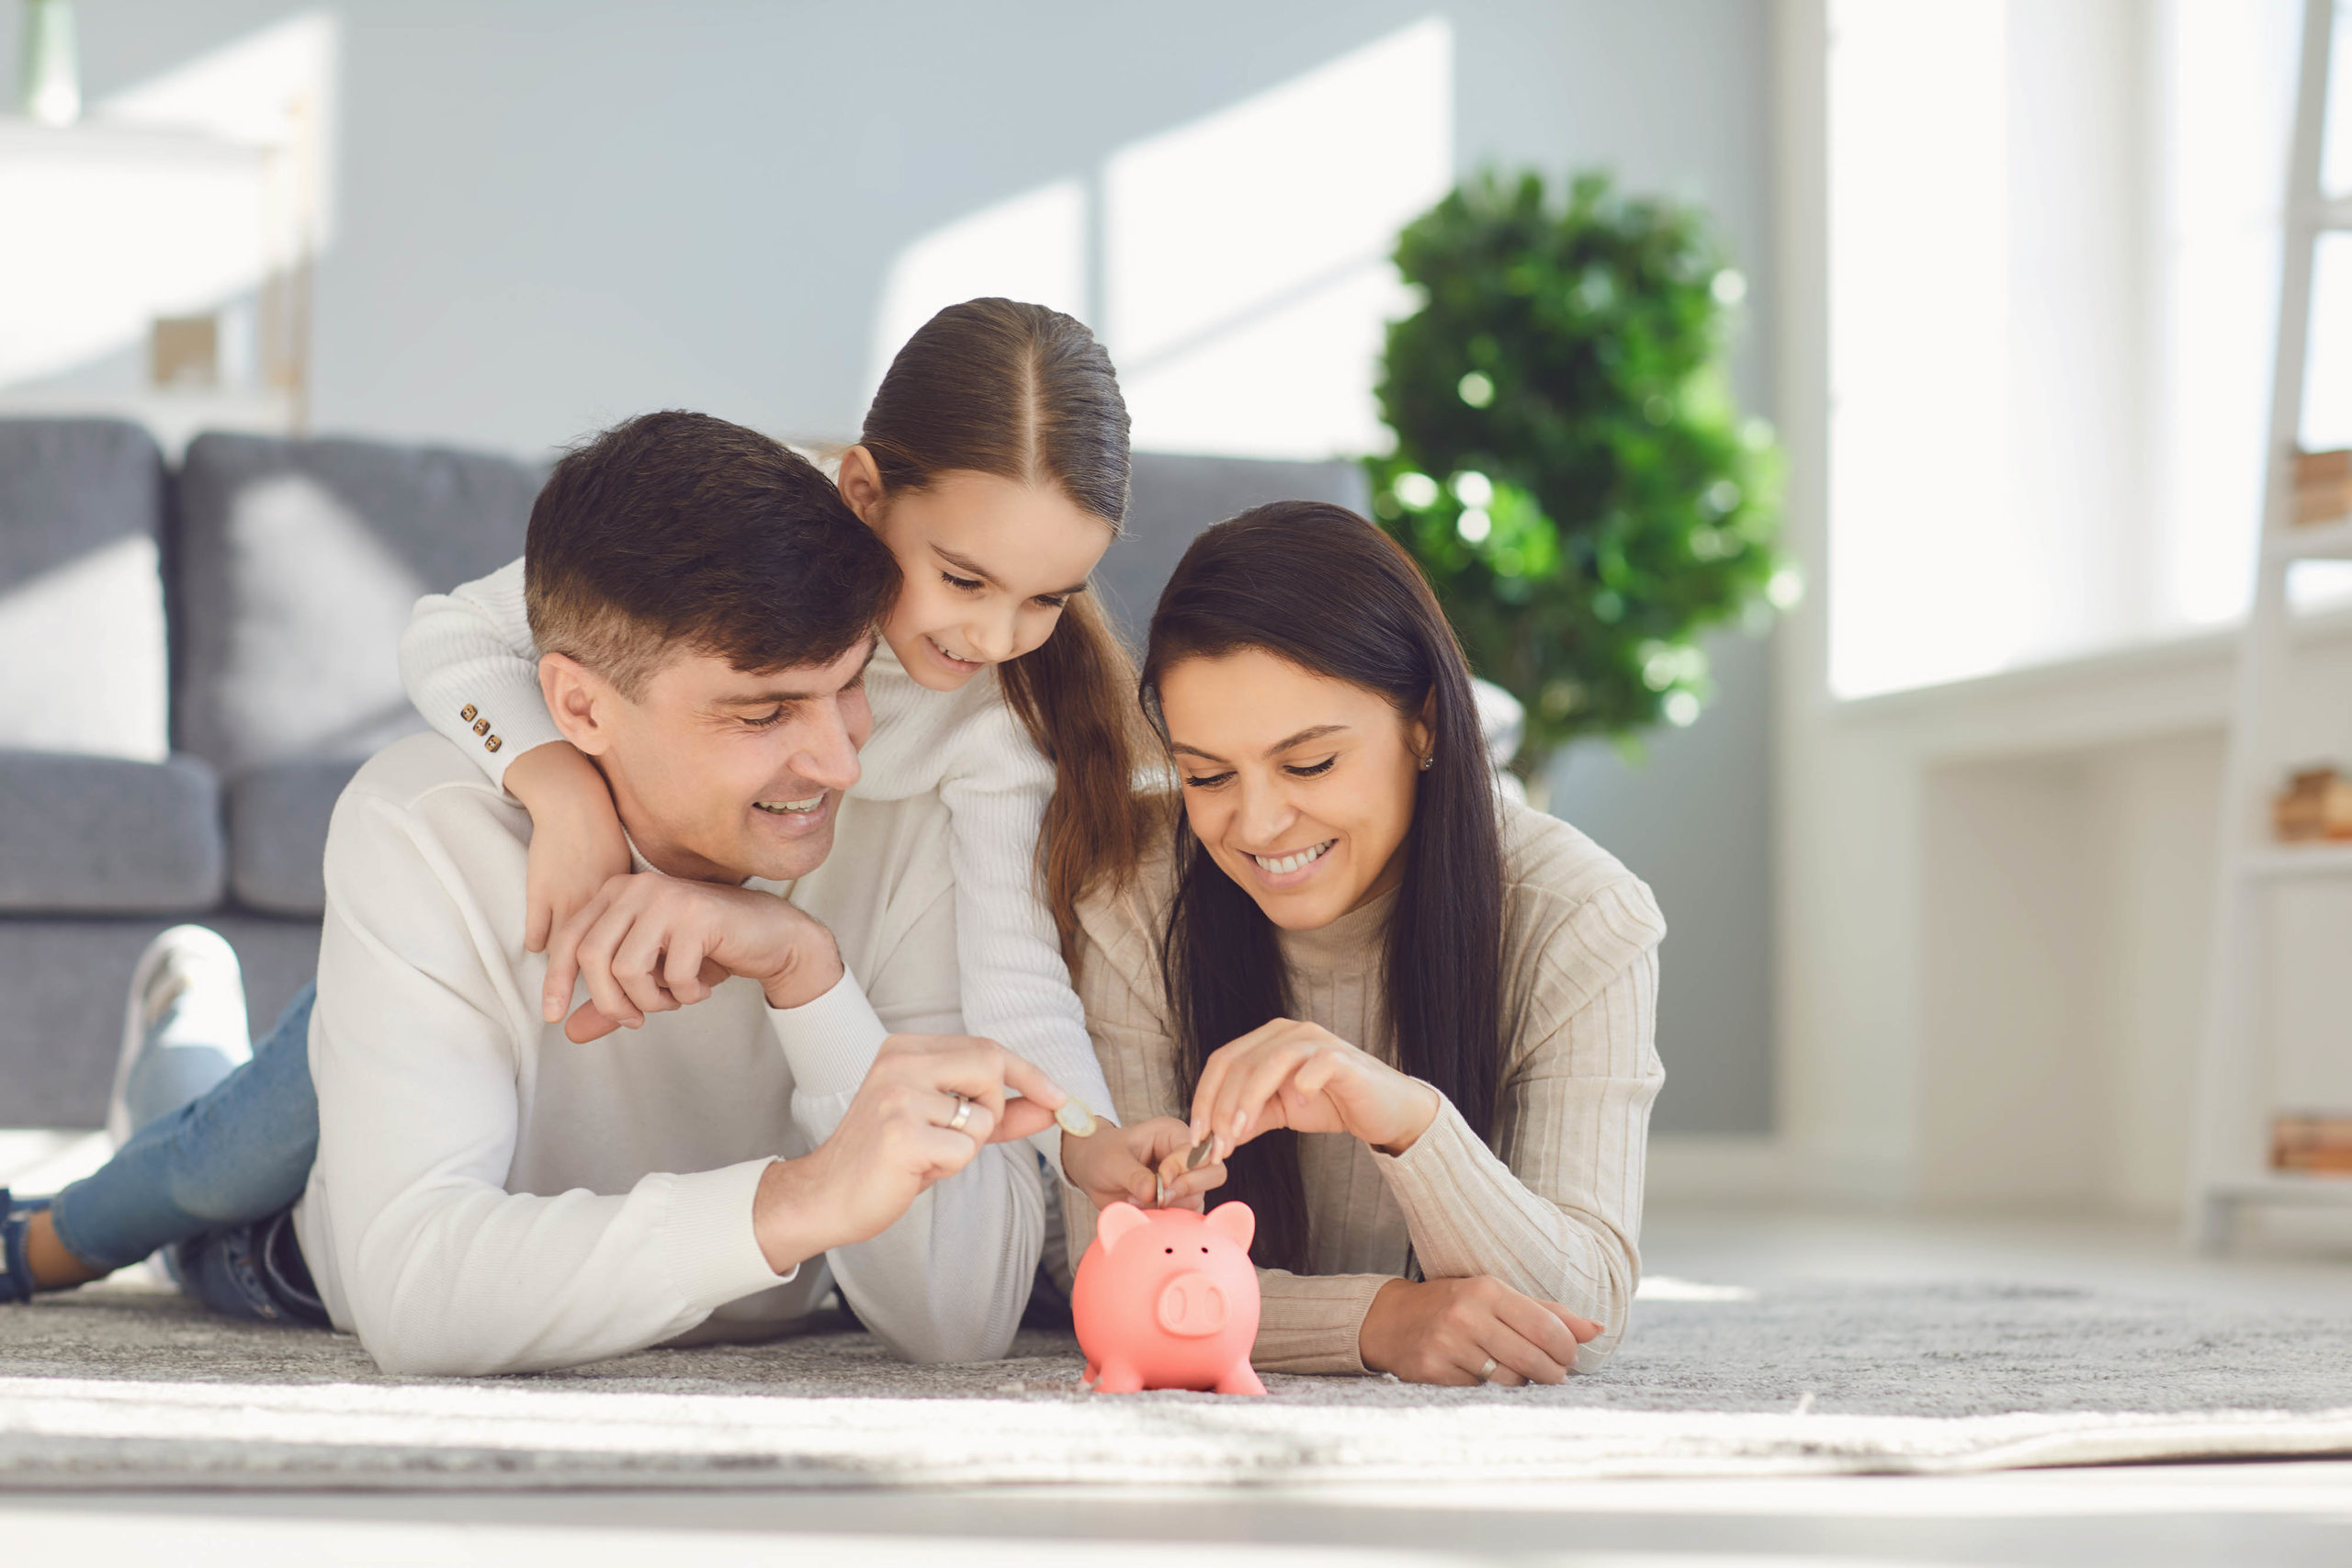 Happy family saves money in a piggy bank pig.